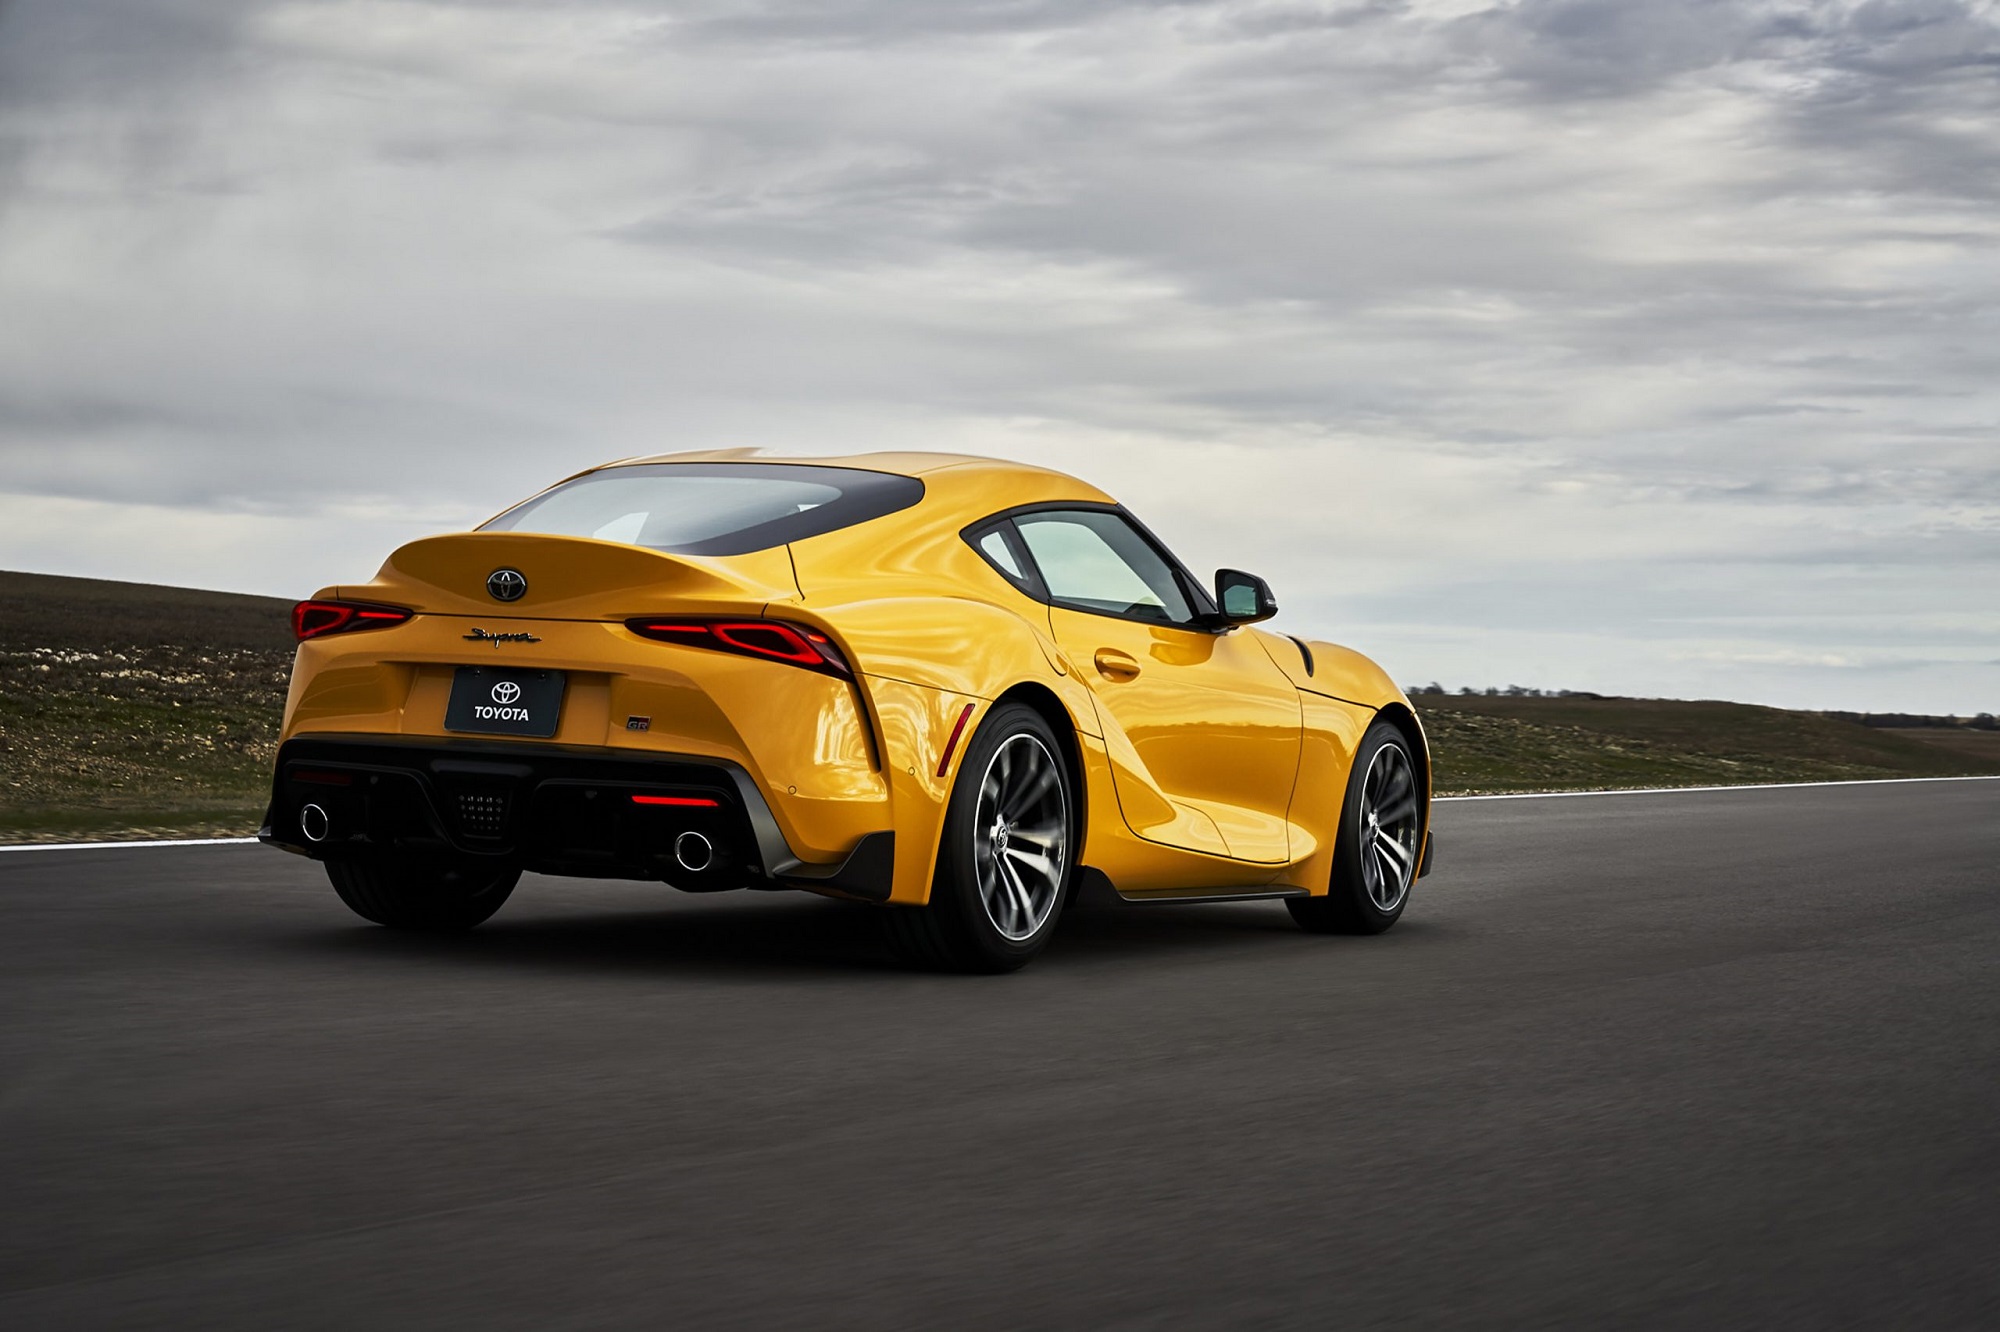 The Toyota Supra is a cheap fast car that can go from 0-60 mph in under 4 seconds